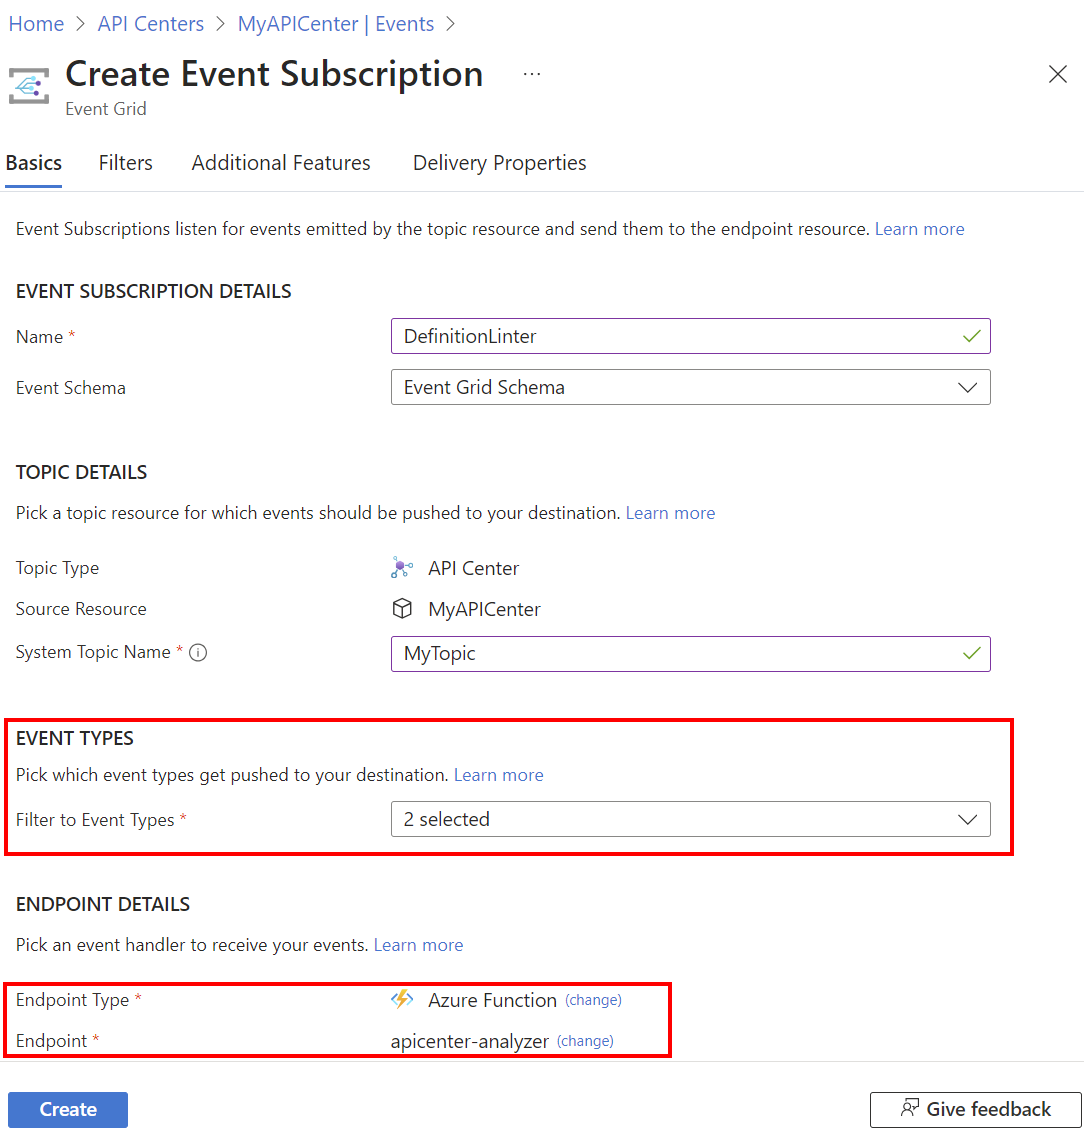 Screenshot of creating the event subscription in the portal.